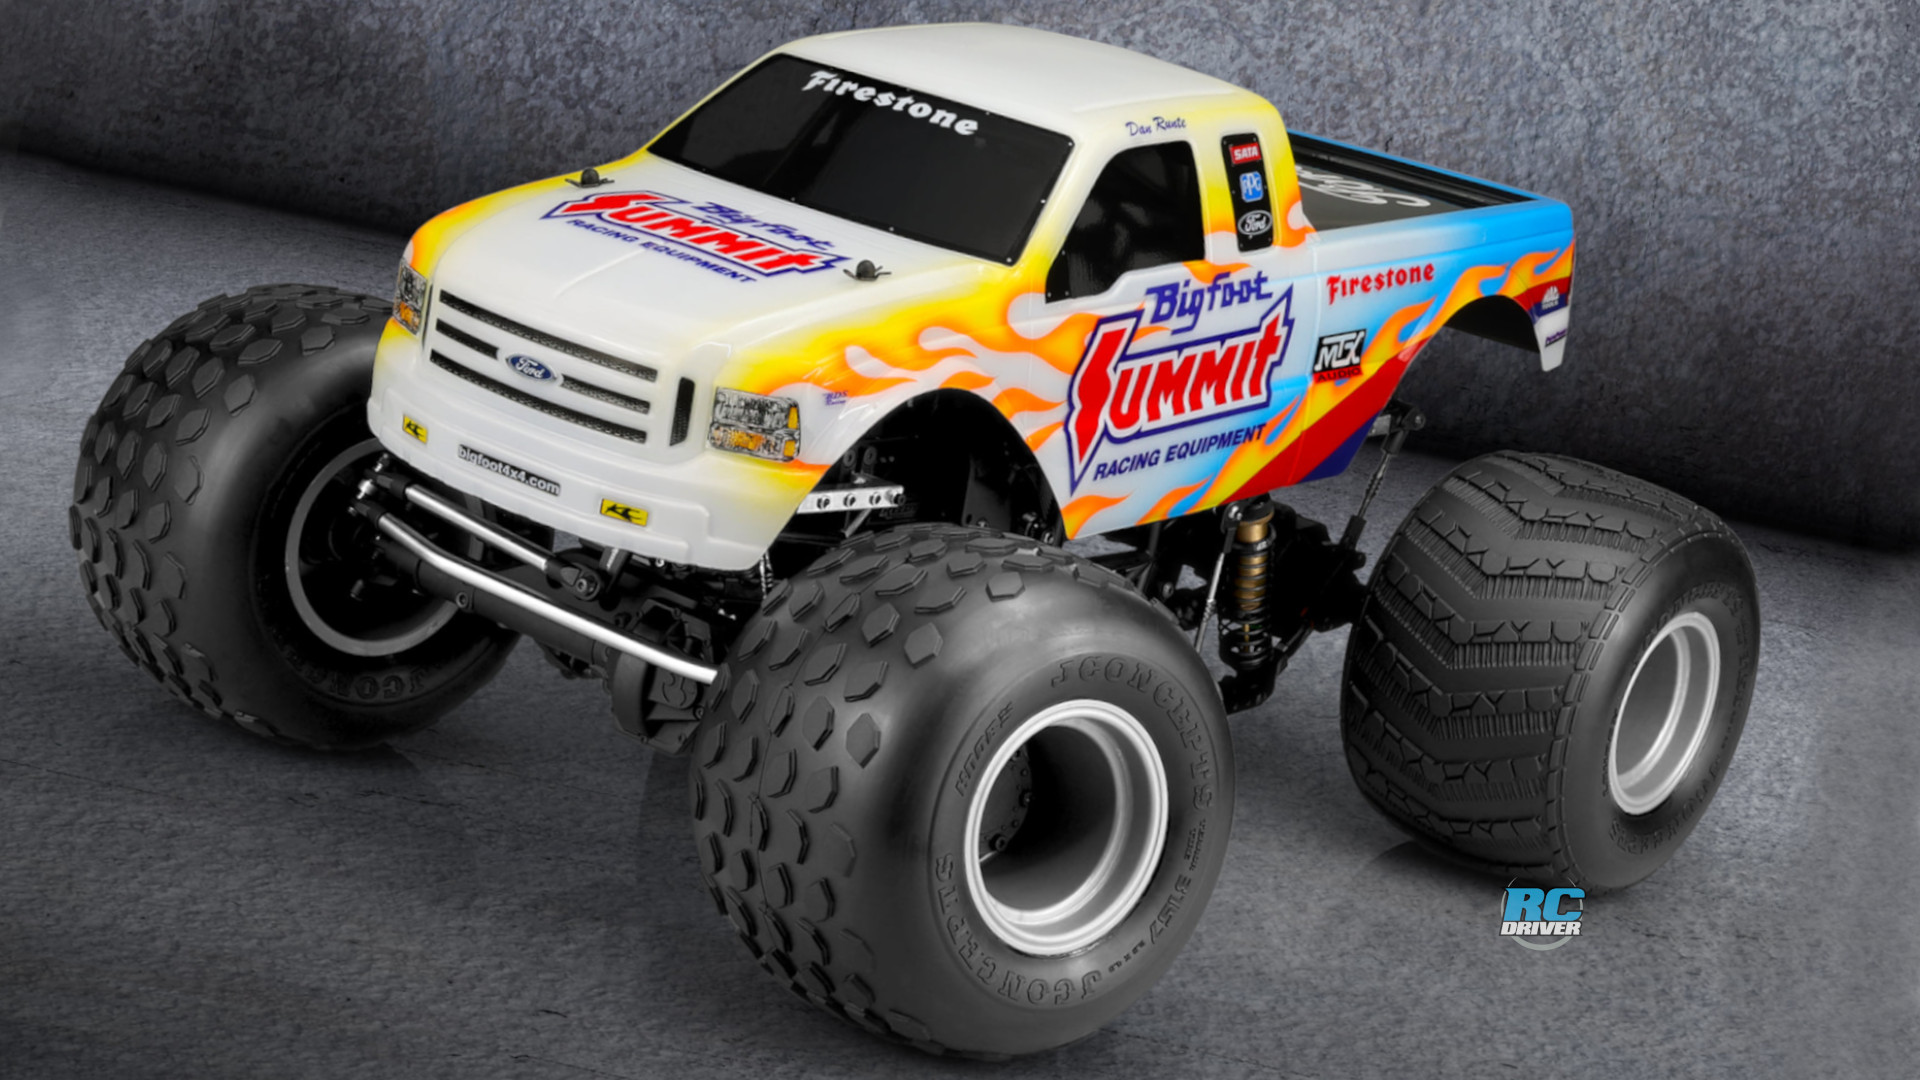 JConcepts Knobs And Launch Monster Truck Tires